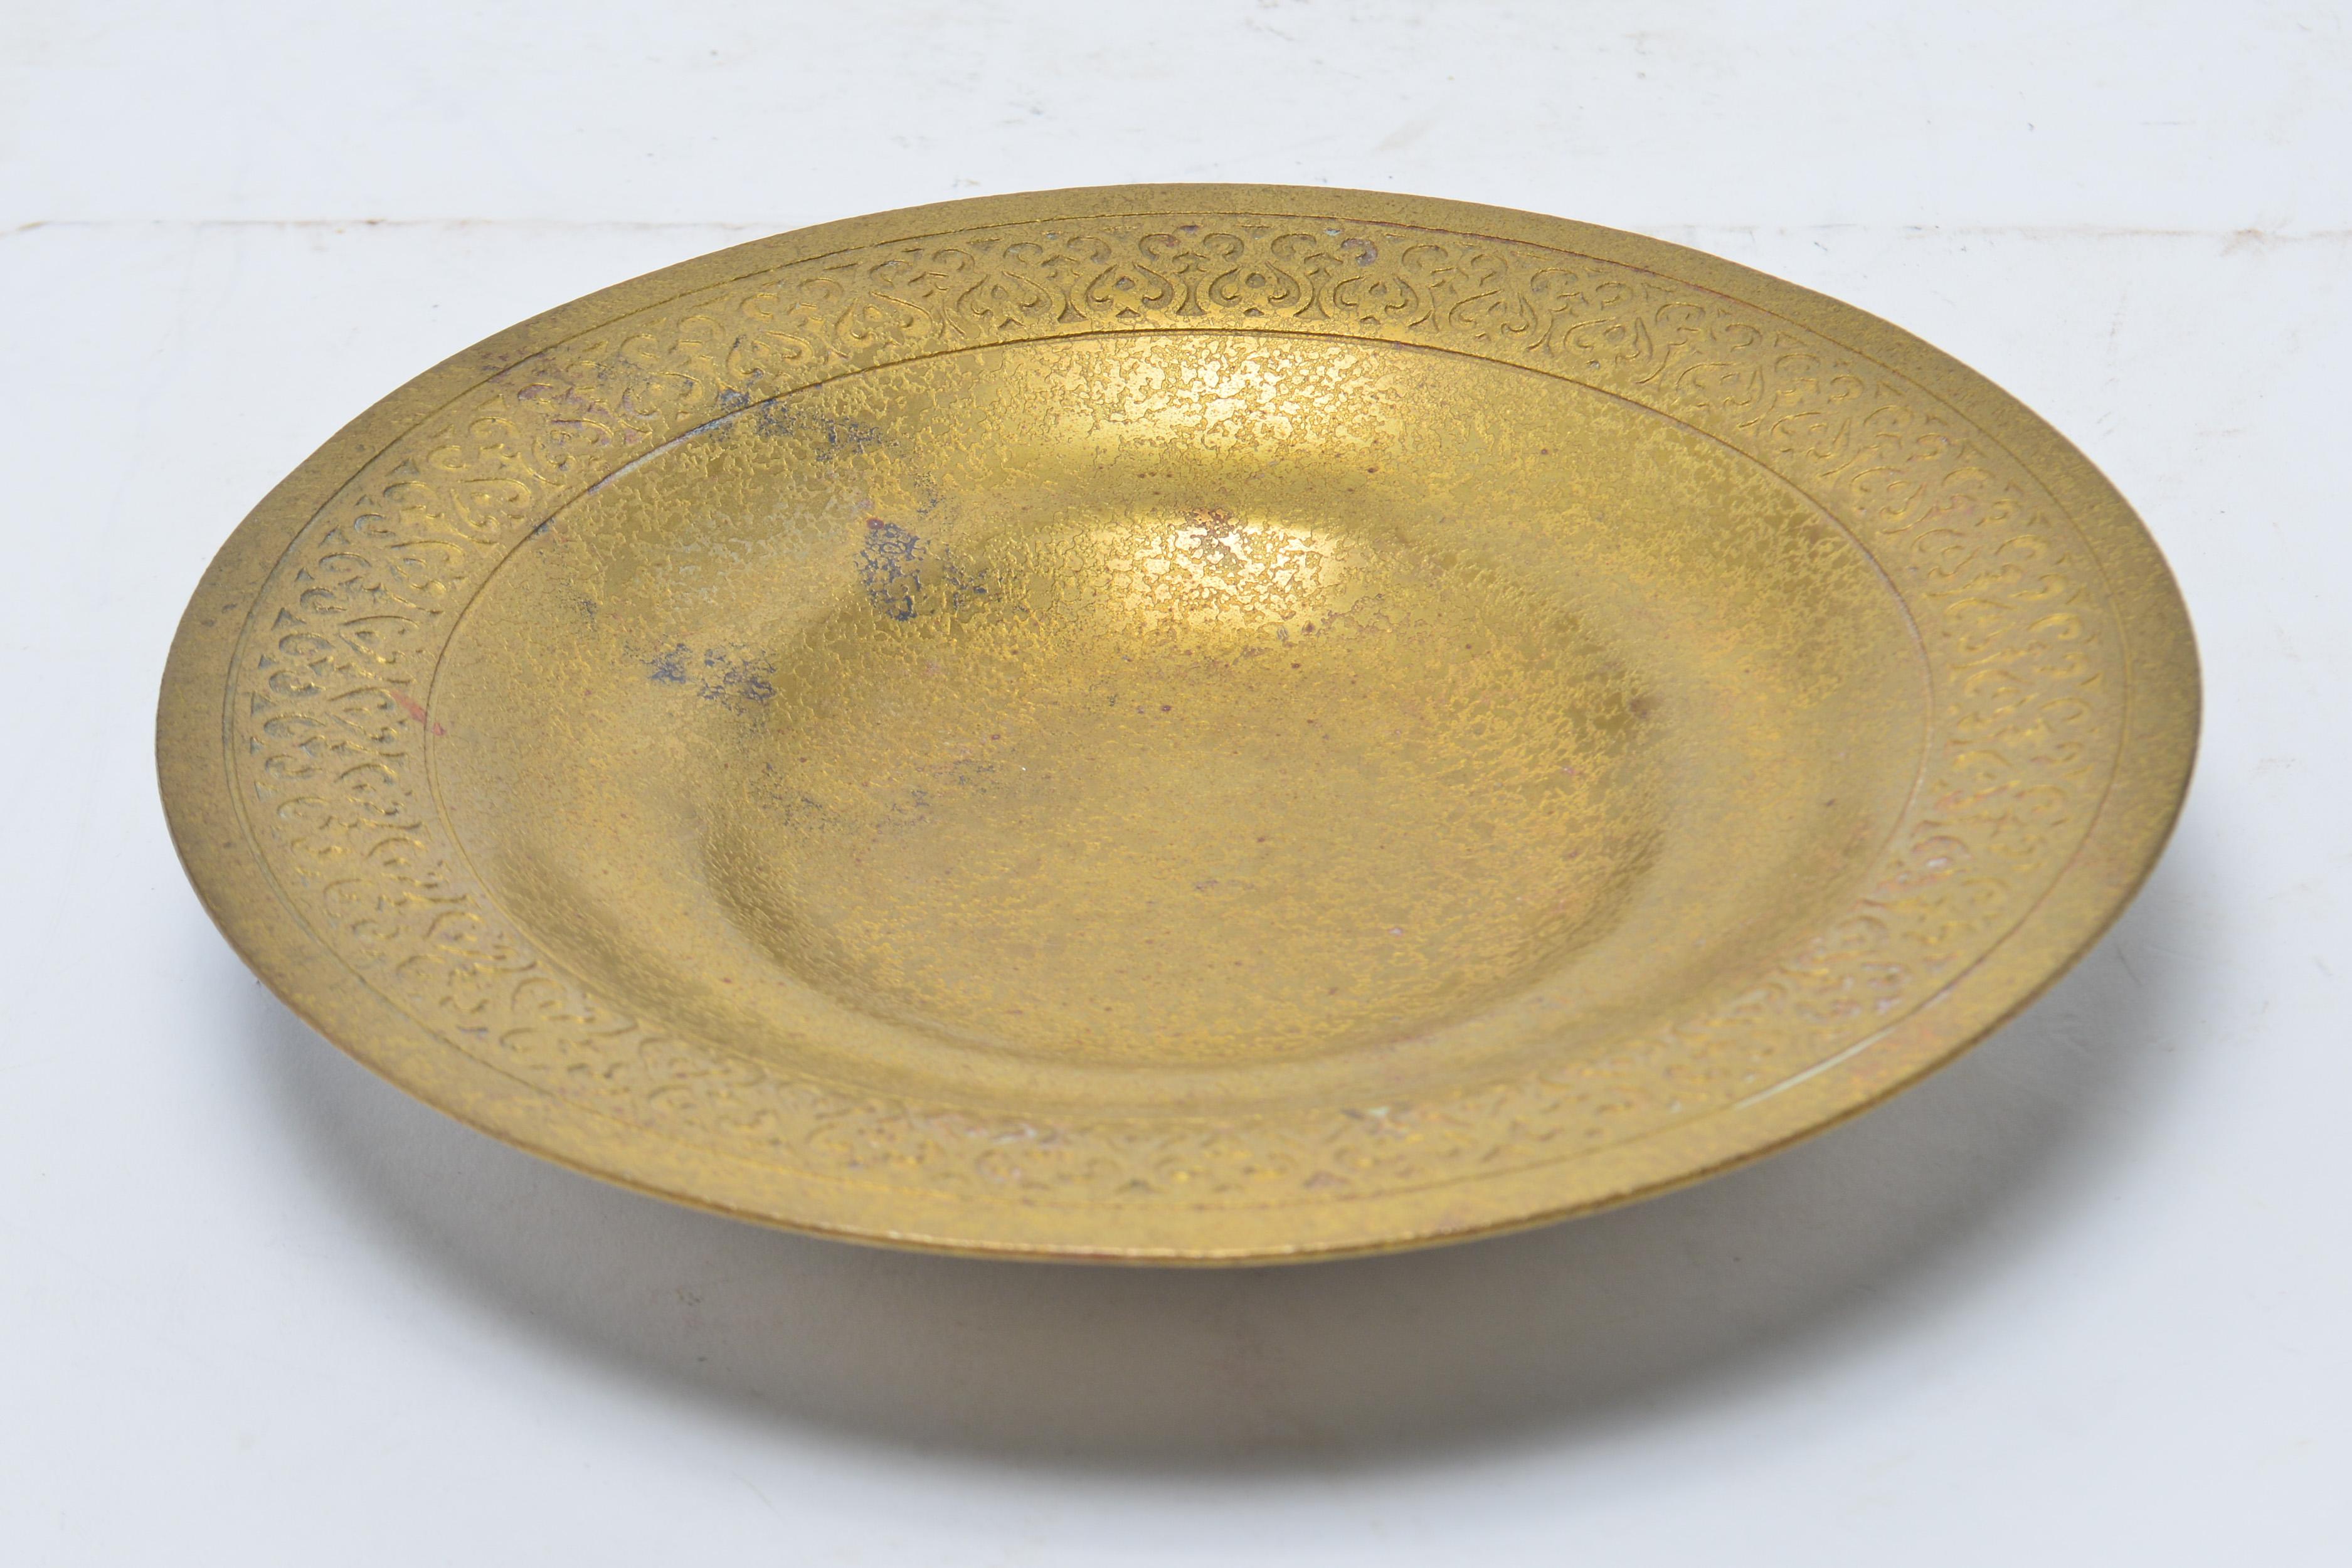 American Tiffany Studios bronze doré bowl with frieze motif band. The piece is marked 